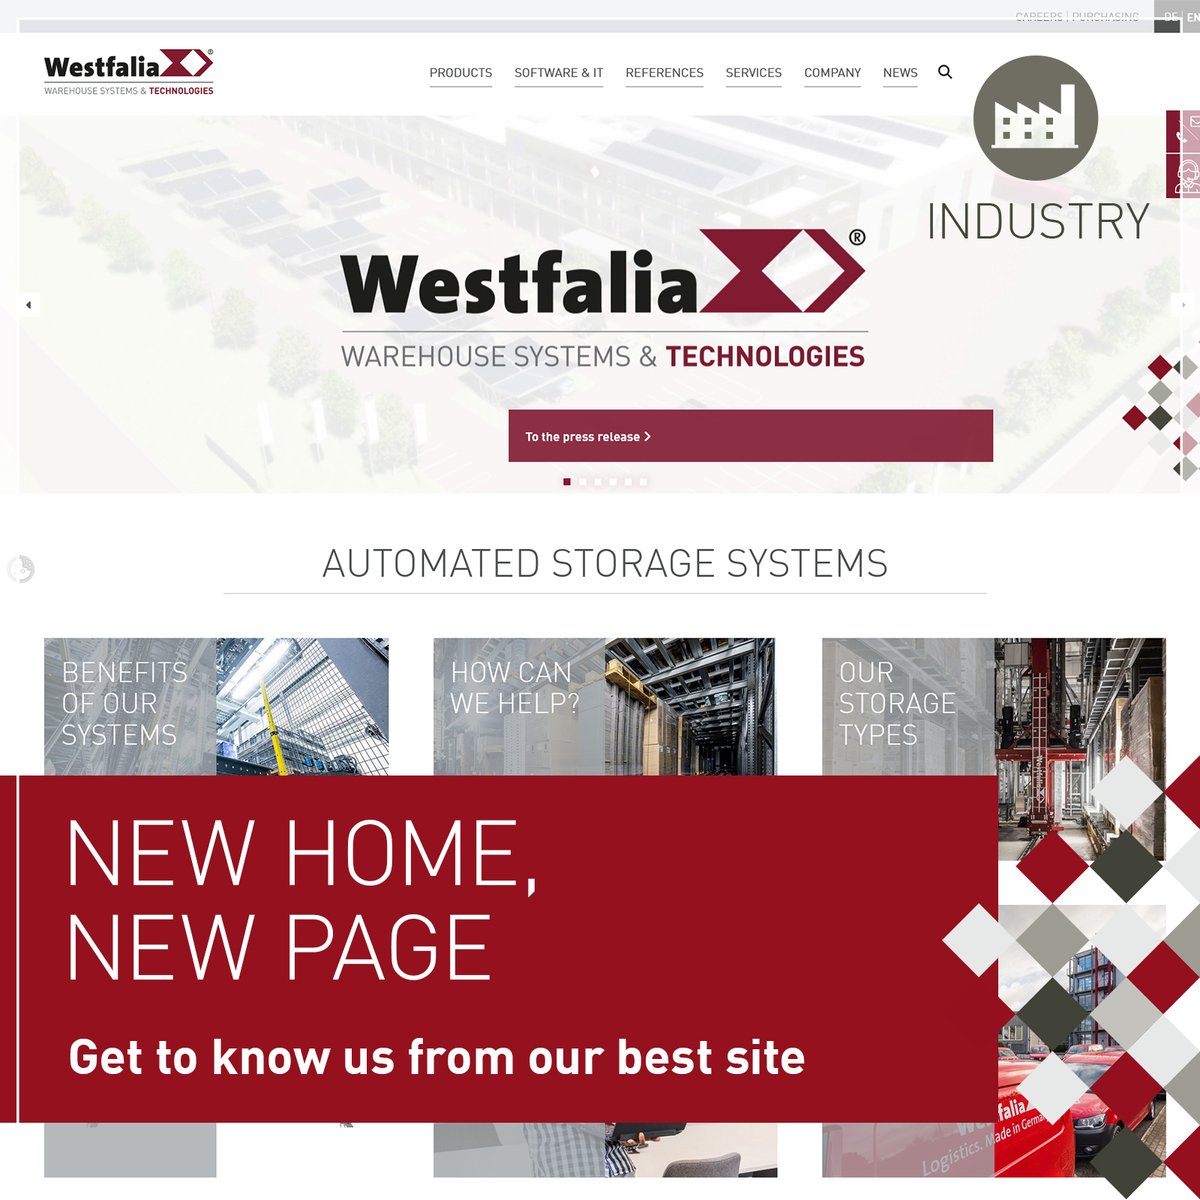 While our production is already at the new location Am Teuto 1 with twice the production and test capacity, and we are still setting up in the office complex, we have already moved virtually. Have you had a look yet? westfaliaeurope.com/en/home.html #AutomatedStorage #Website #Warehousing